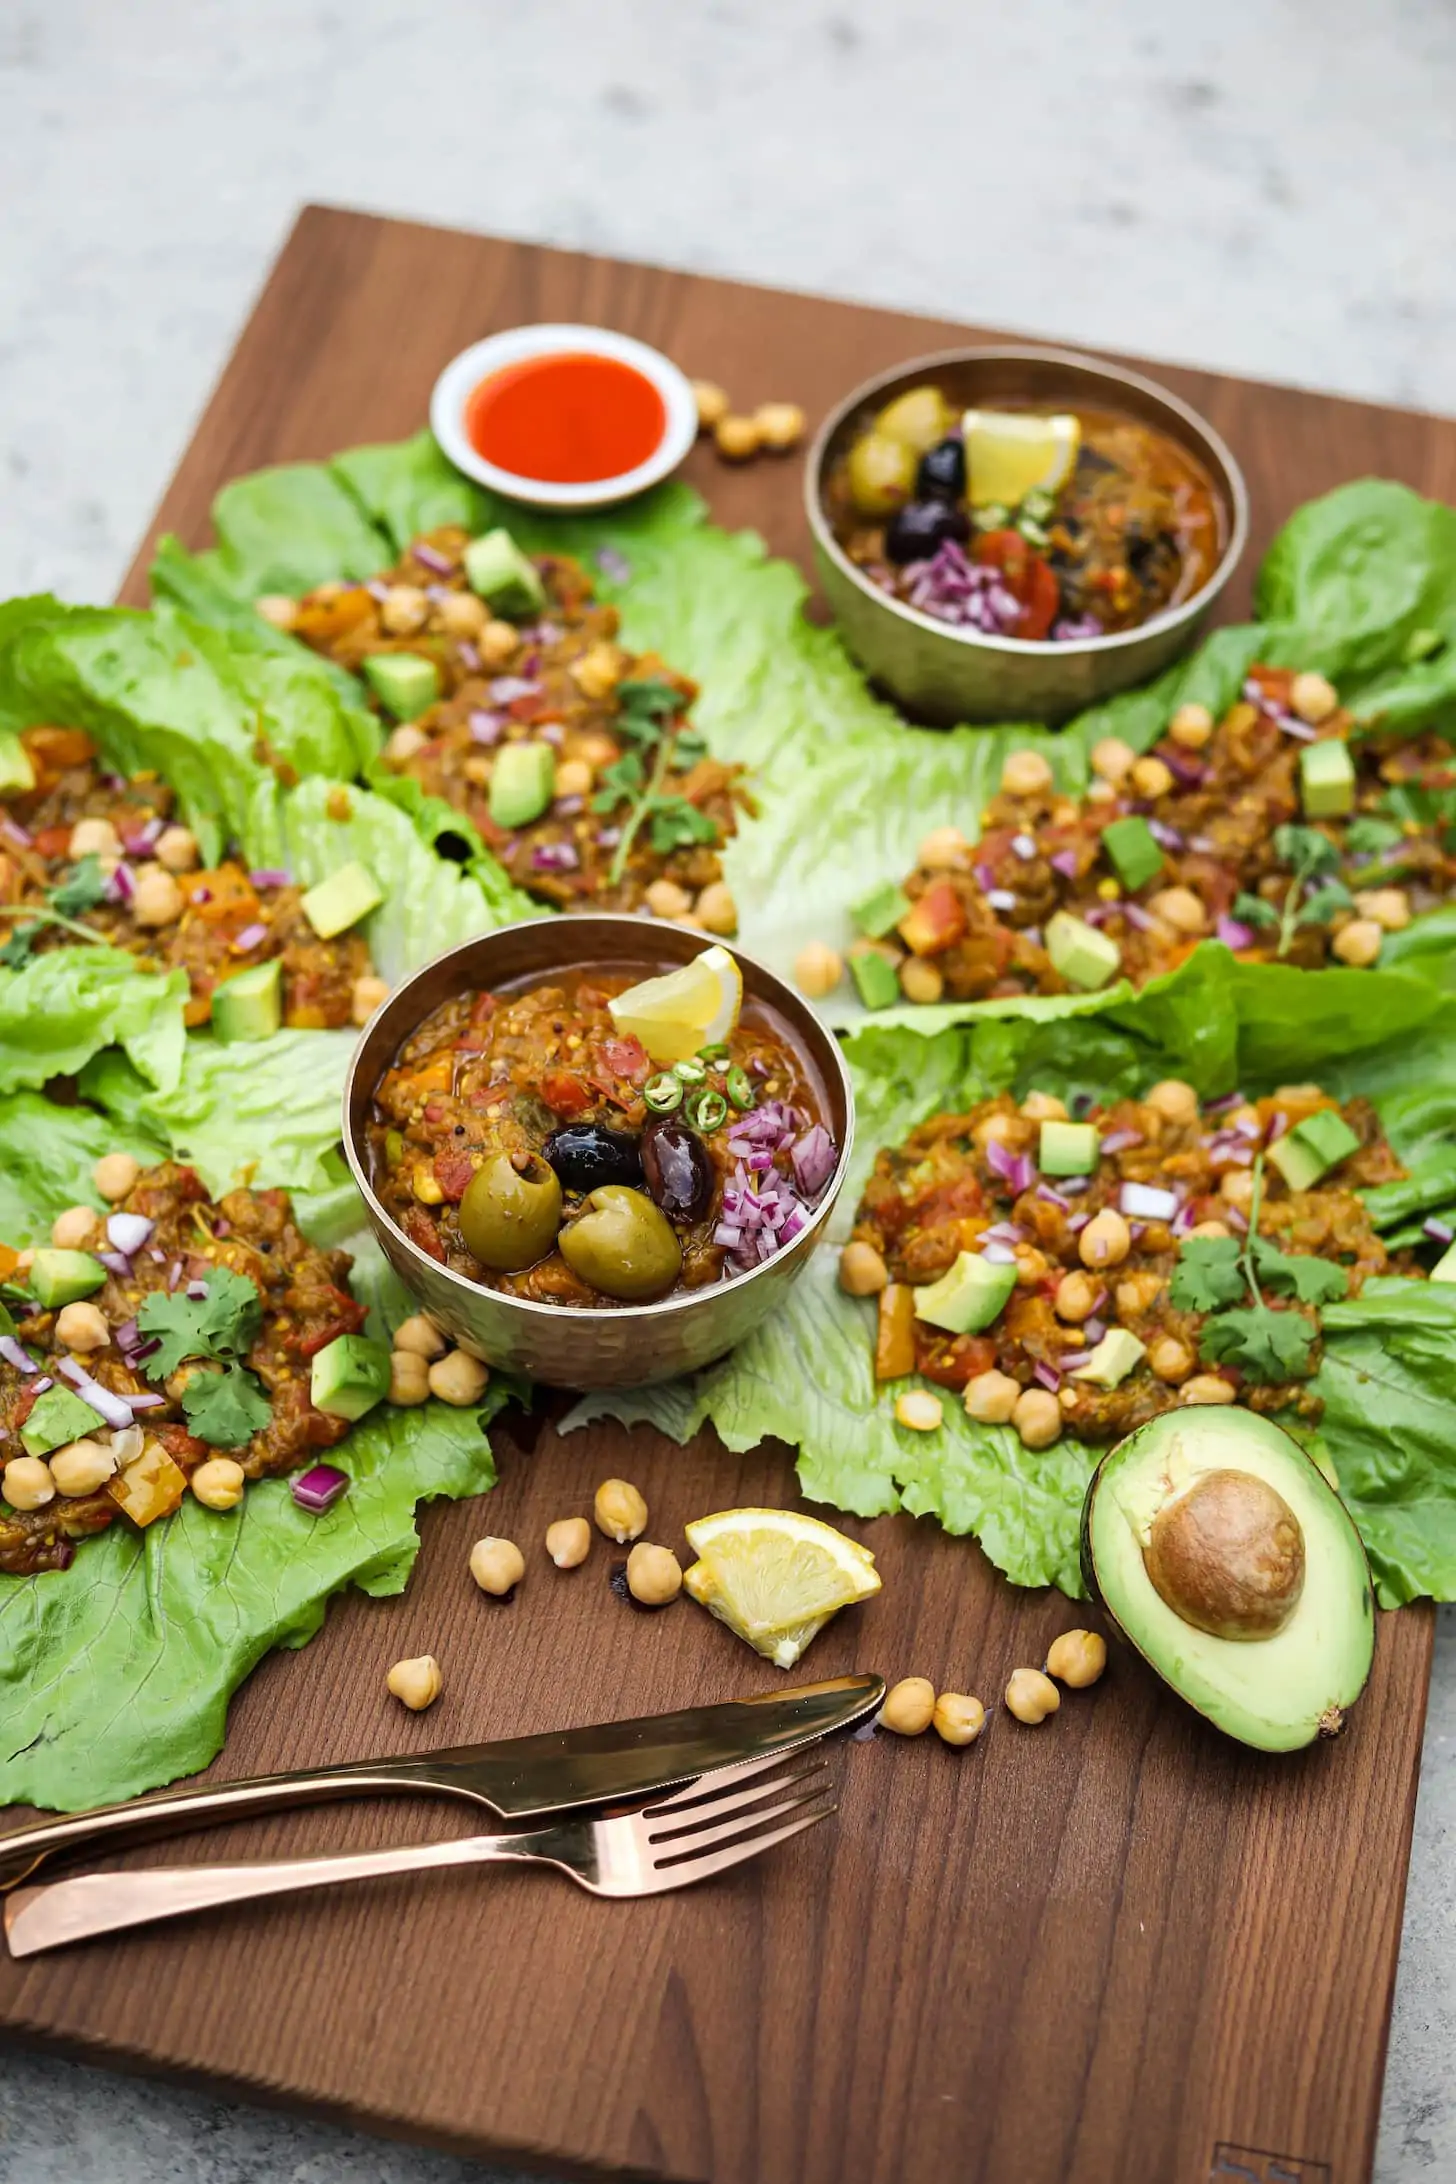 perspective image of two bowls of mashed eggplant surrounded by lettuce leaves stuffed with mashed eggplant topped with avocado pieces and chickpeas.